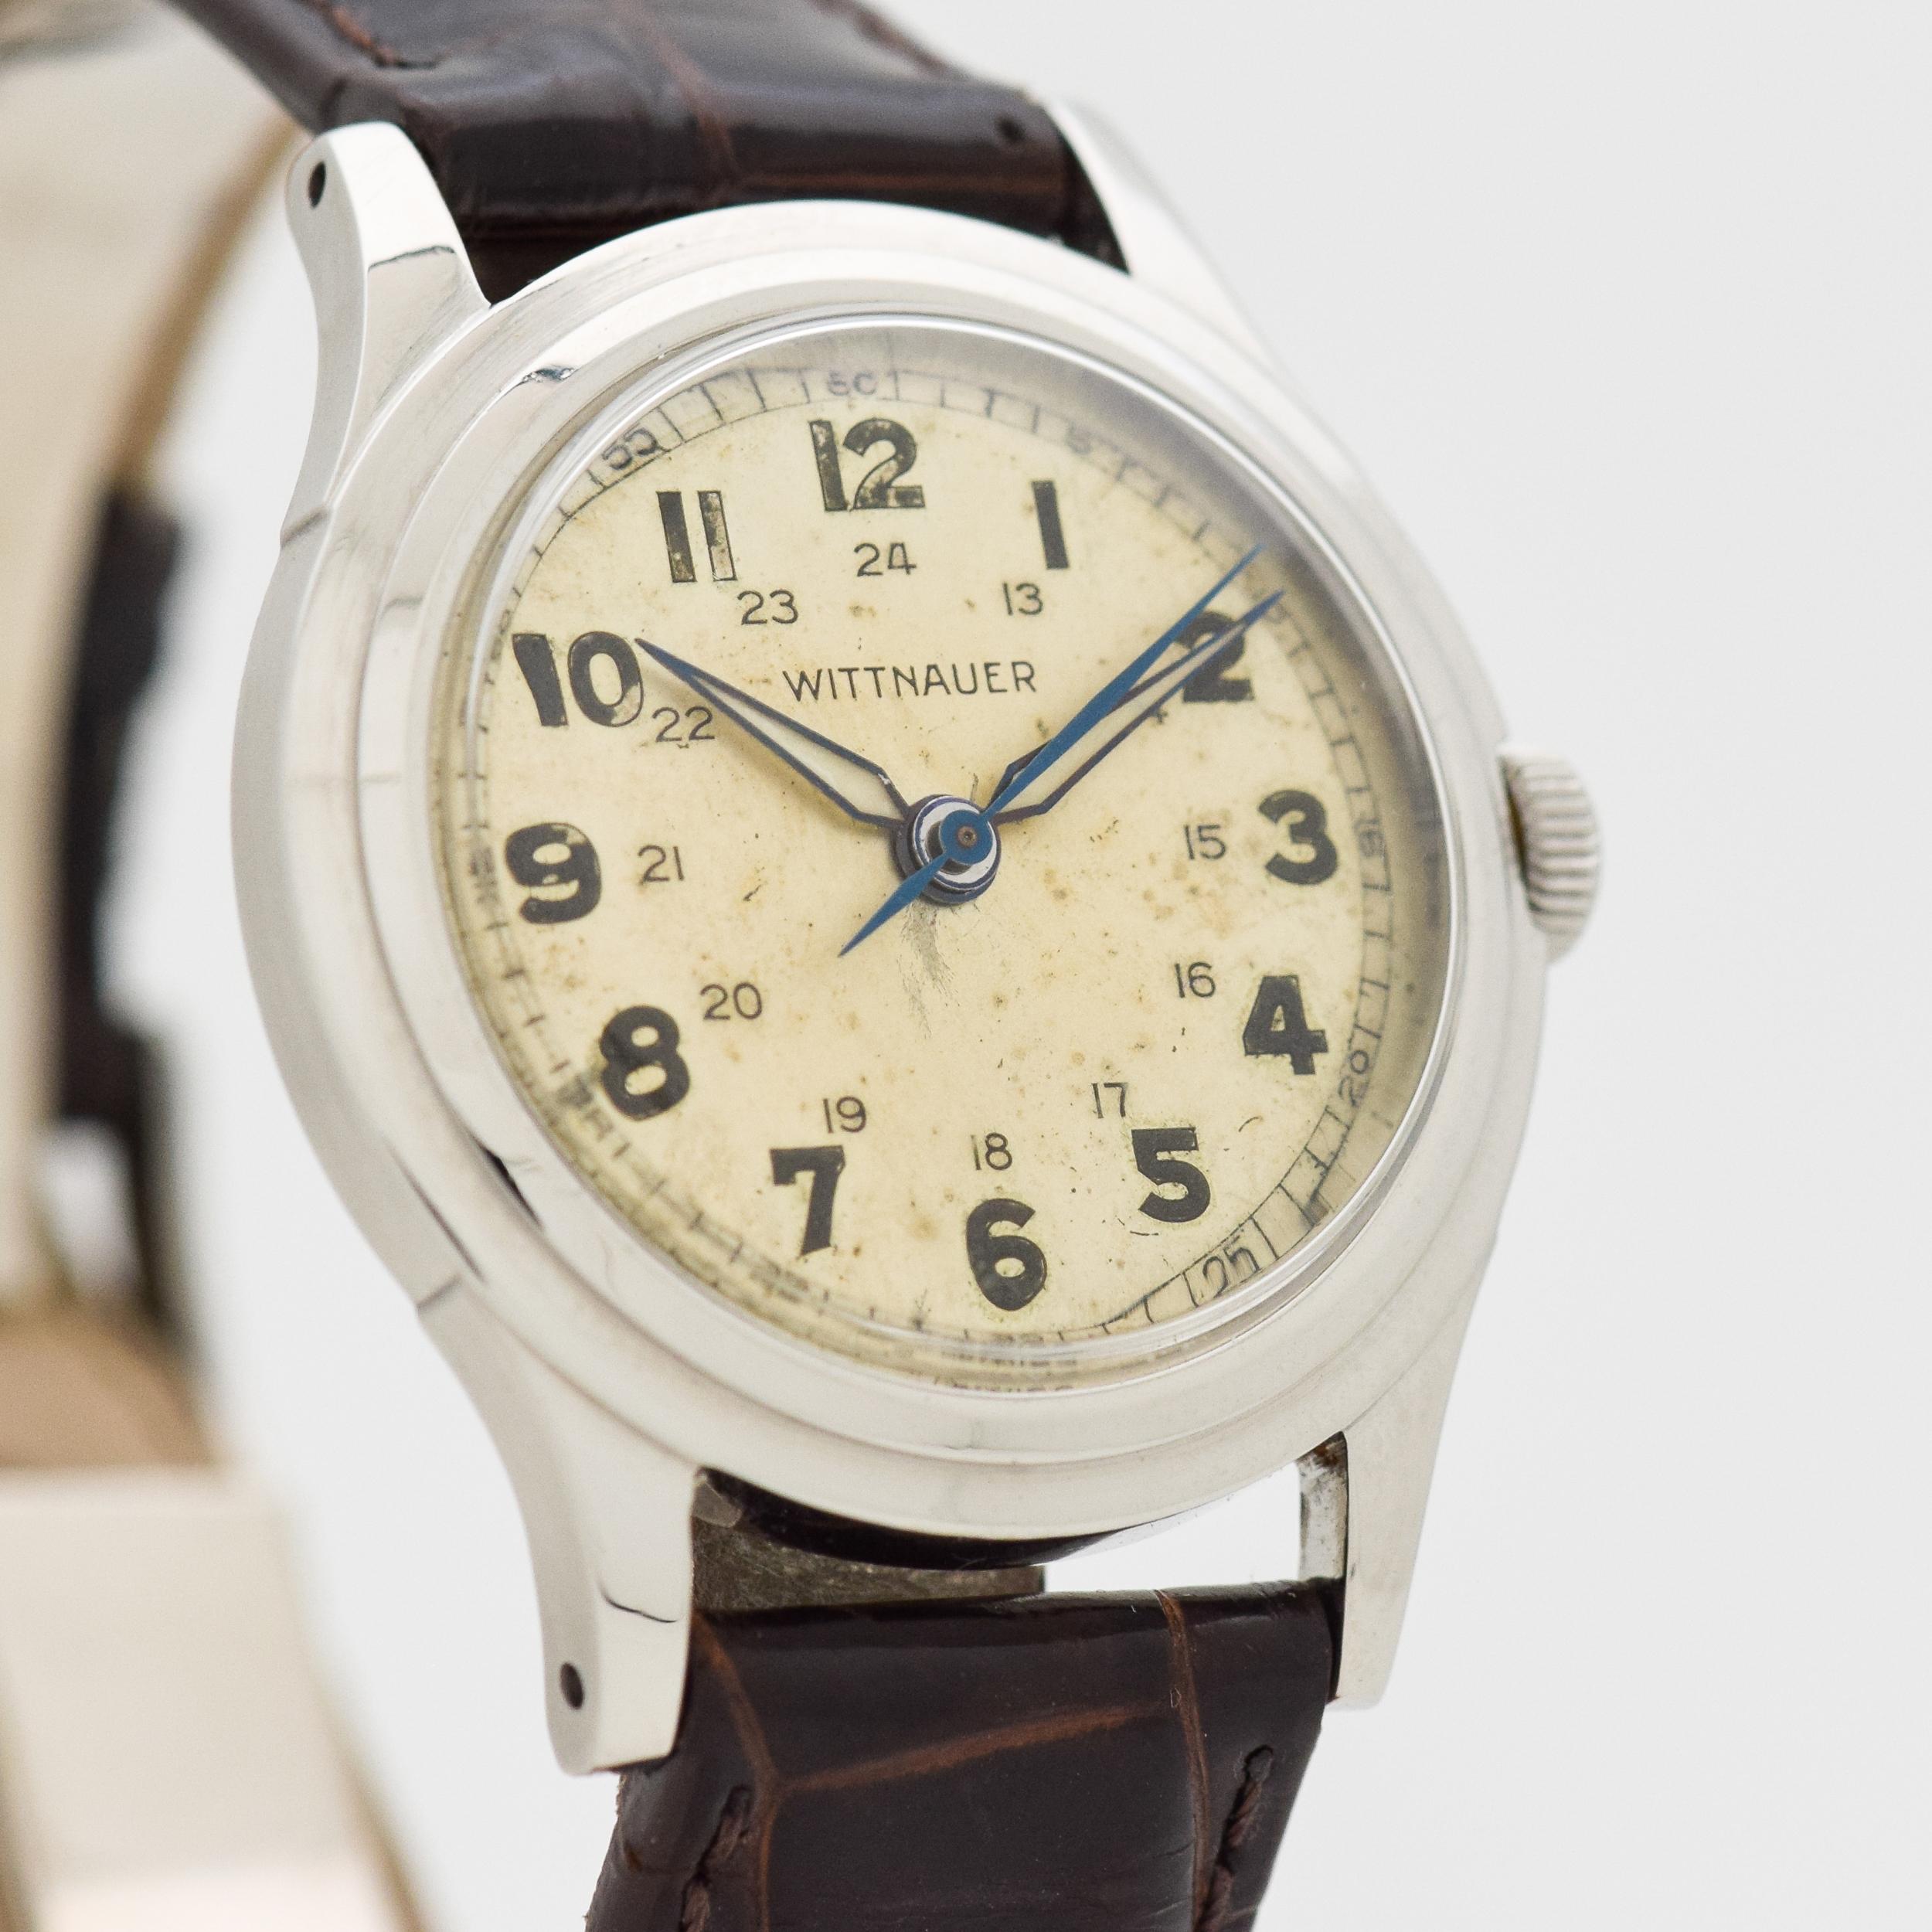 1940's Vintage Wittnauer WWII-era Military-style Stainless Steel watch with Original Silver Dial with Luminous Arabic Numbers. 33mm x 39mm lug to lug (1.3 in. x 1.54 in.) - 15 jewel, manual caliber movement. 100% Genuine Crocodile Glossy Dark